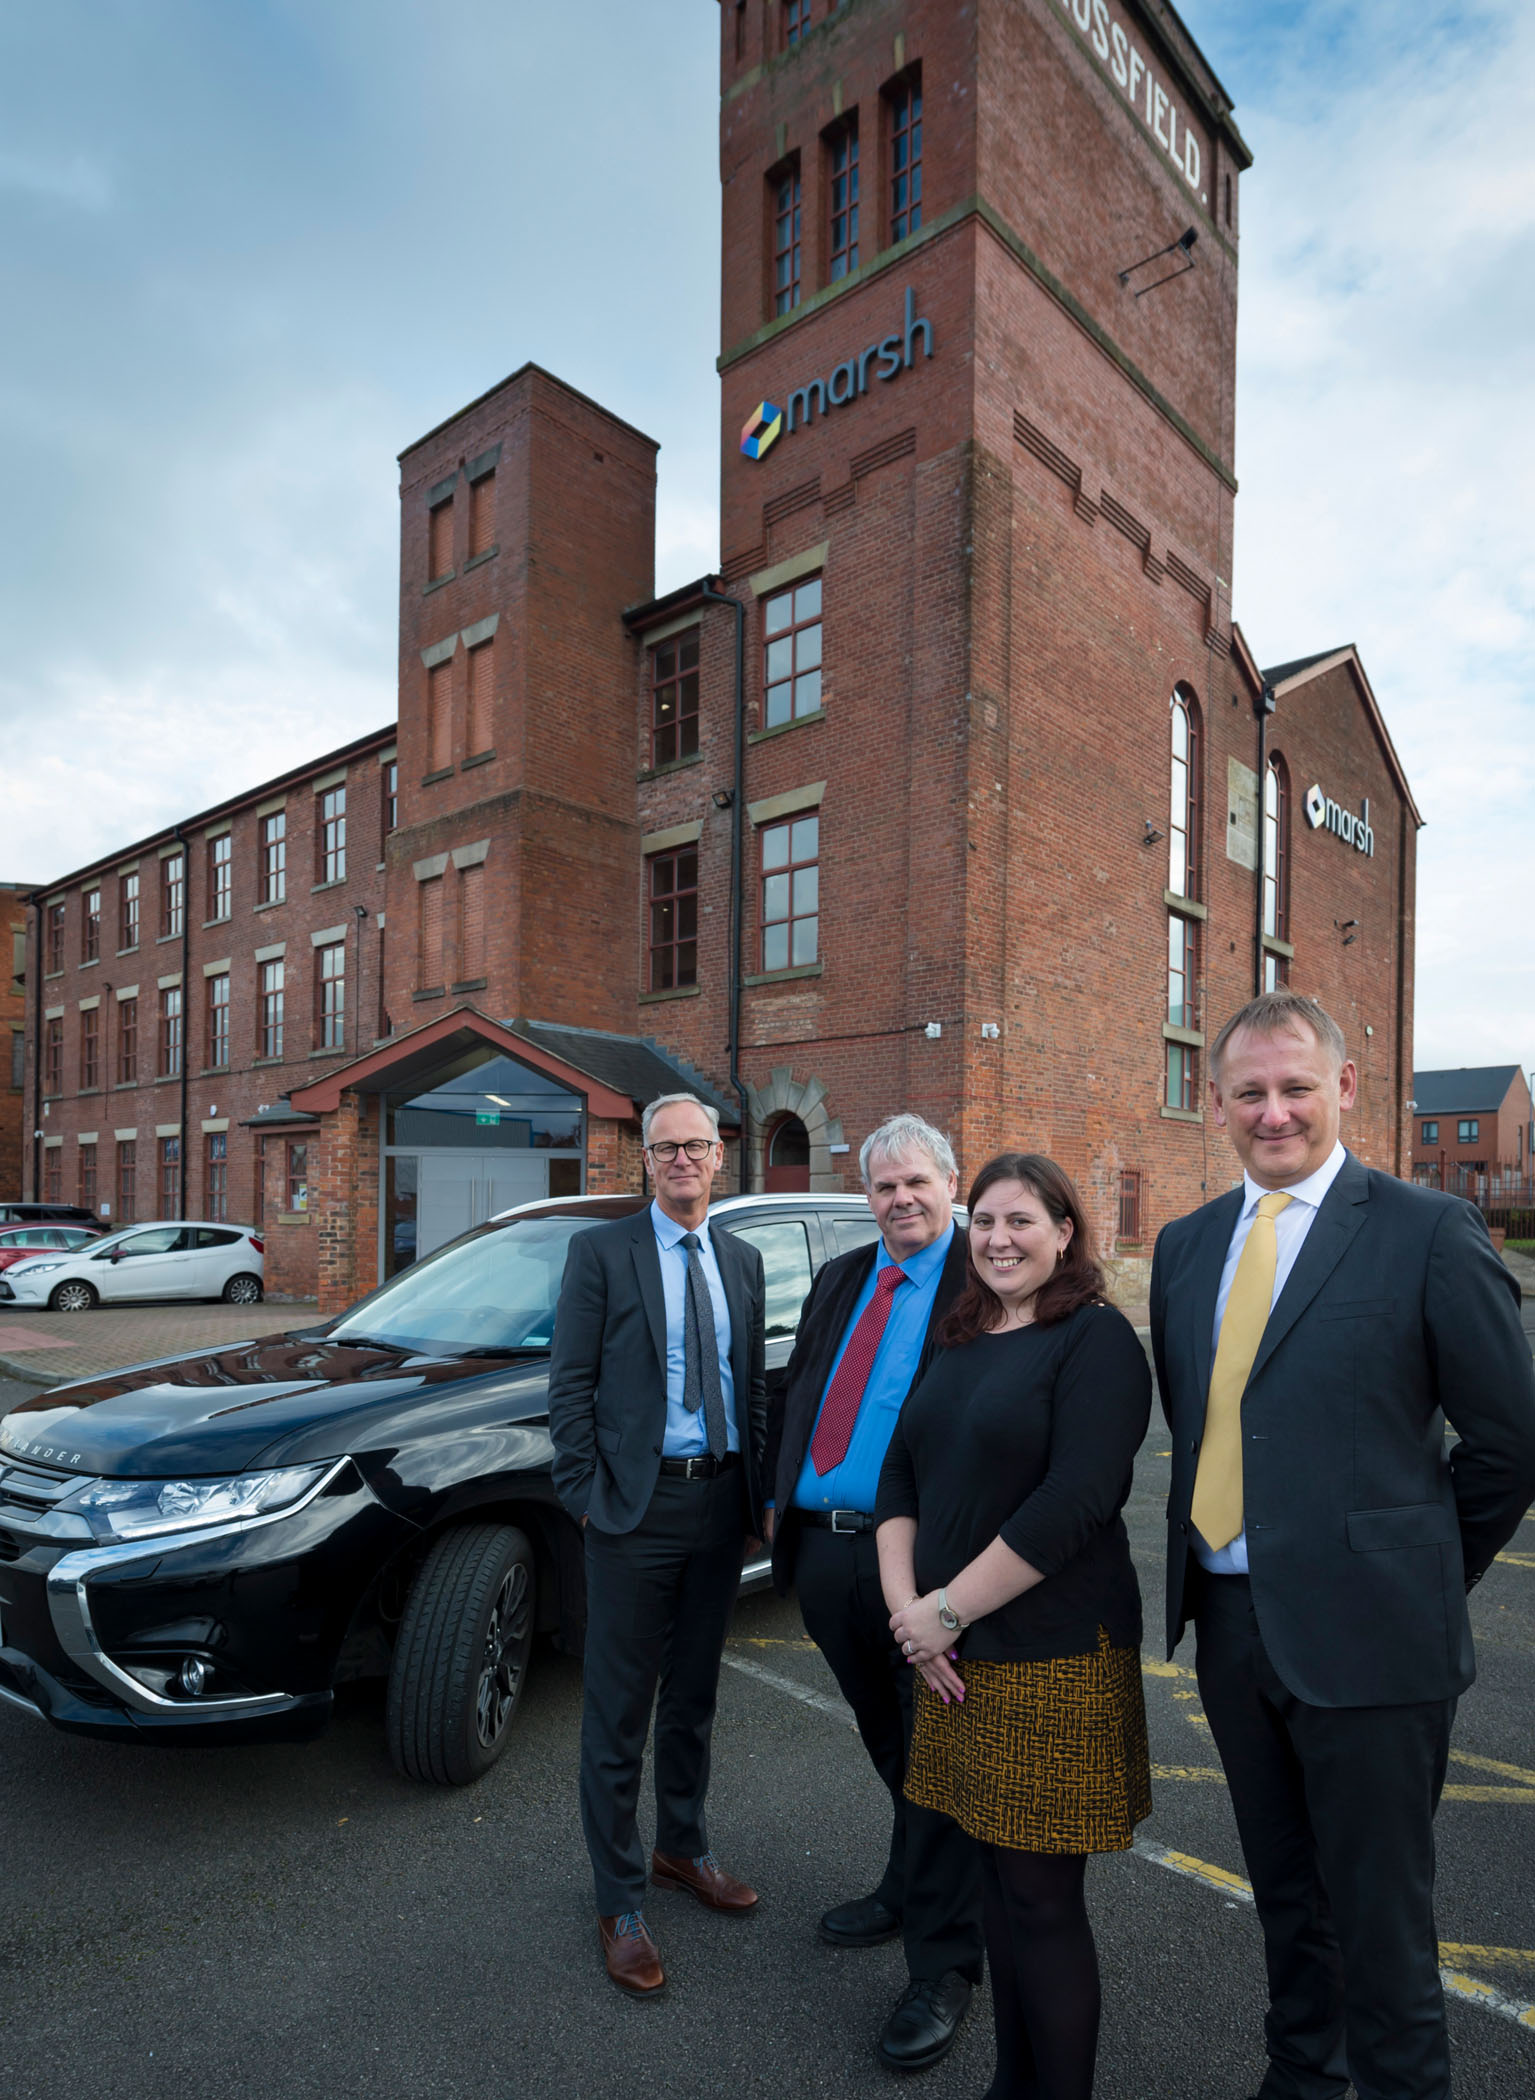 Image: Rochdale car finance company moves up a gear with ambitious expansion